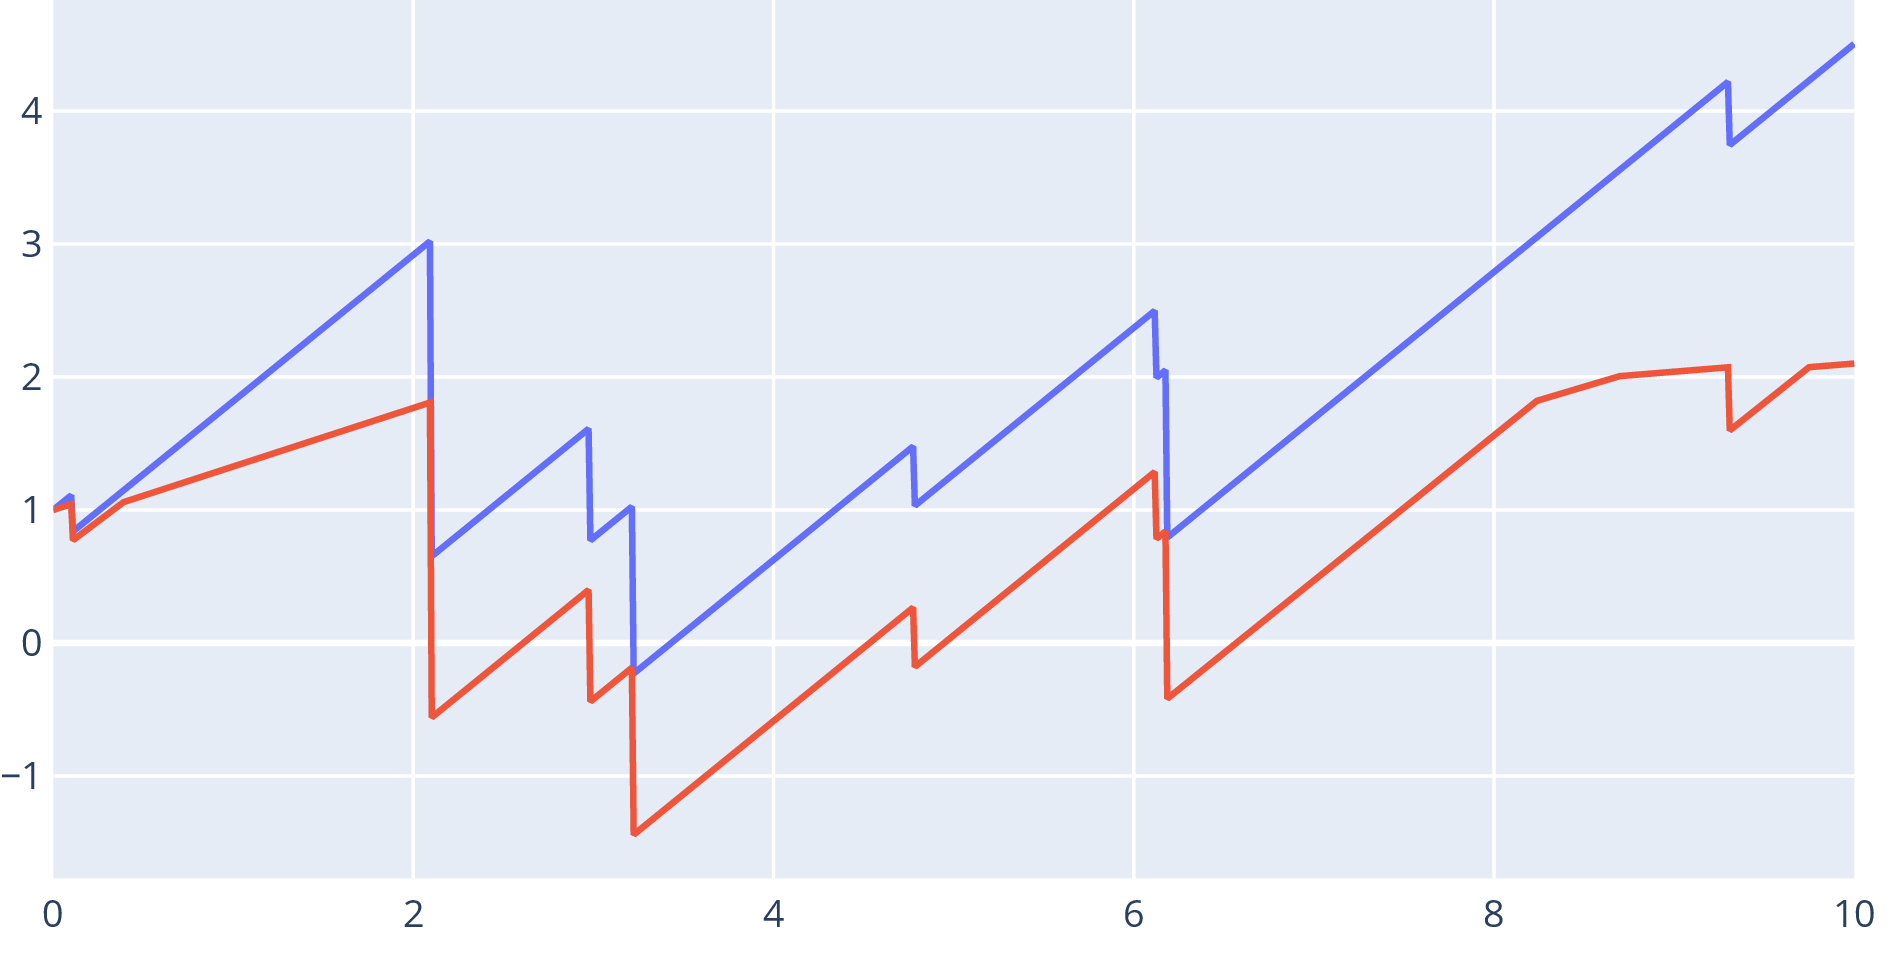 Plot with blue and red series. Blue series increases at constant rate and jumps
down. Red series is similar but in certain intervals (the times where the blue
series is at historic maximum) the rate of increase is less.